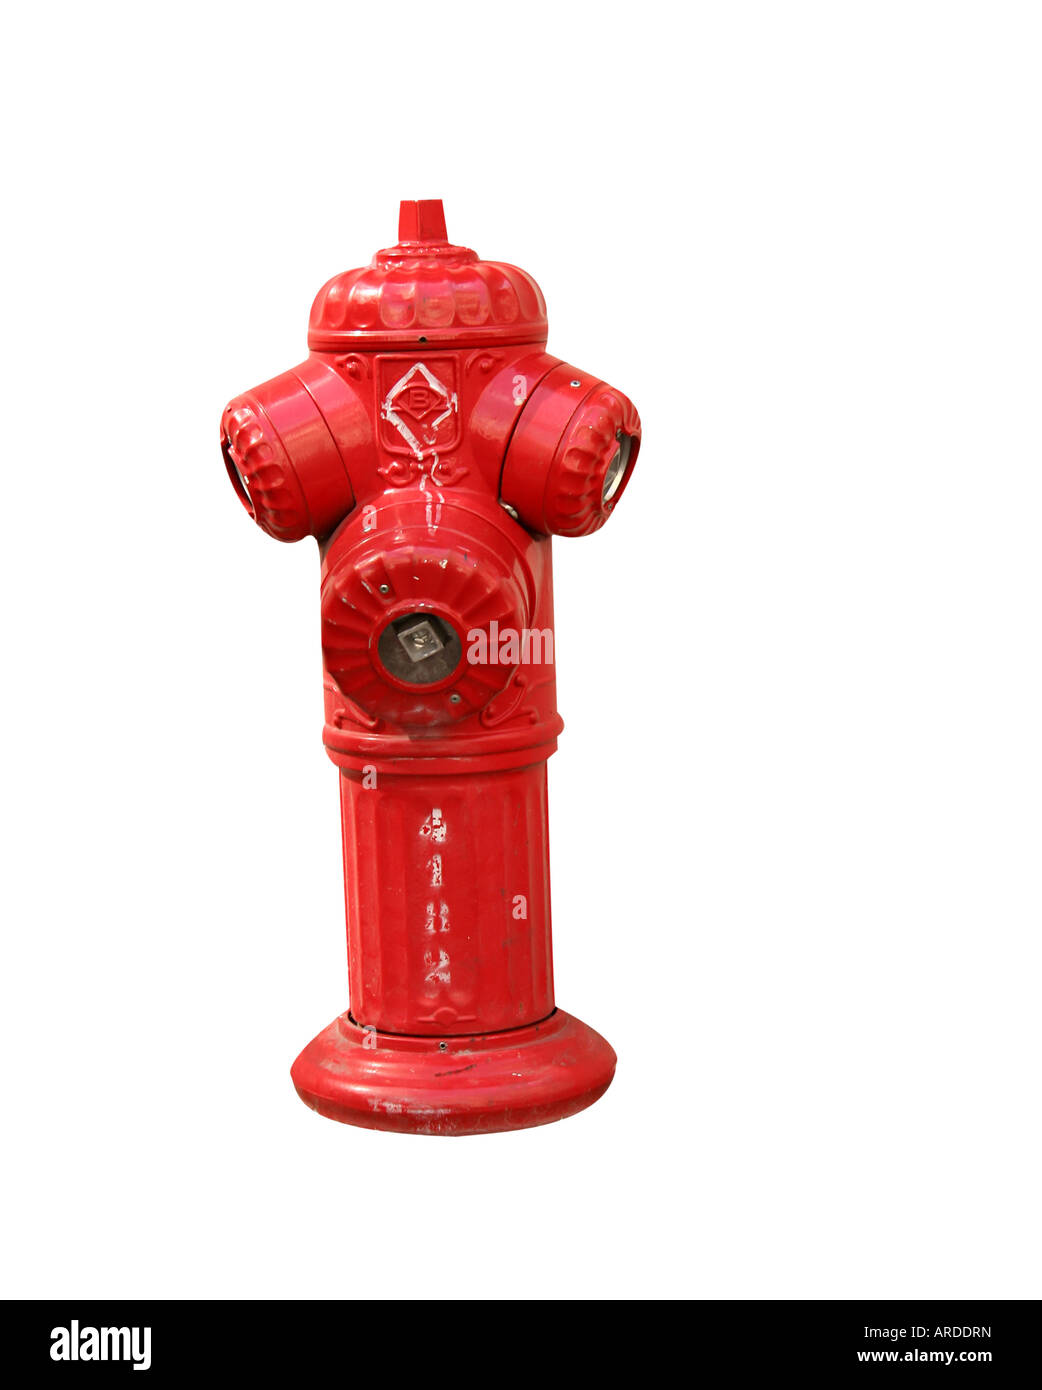 roter Hydrant isoliert auf weiss Stockfoto